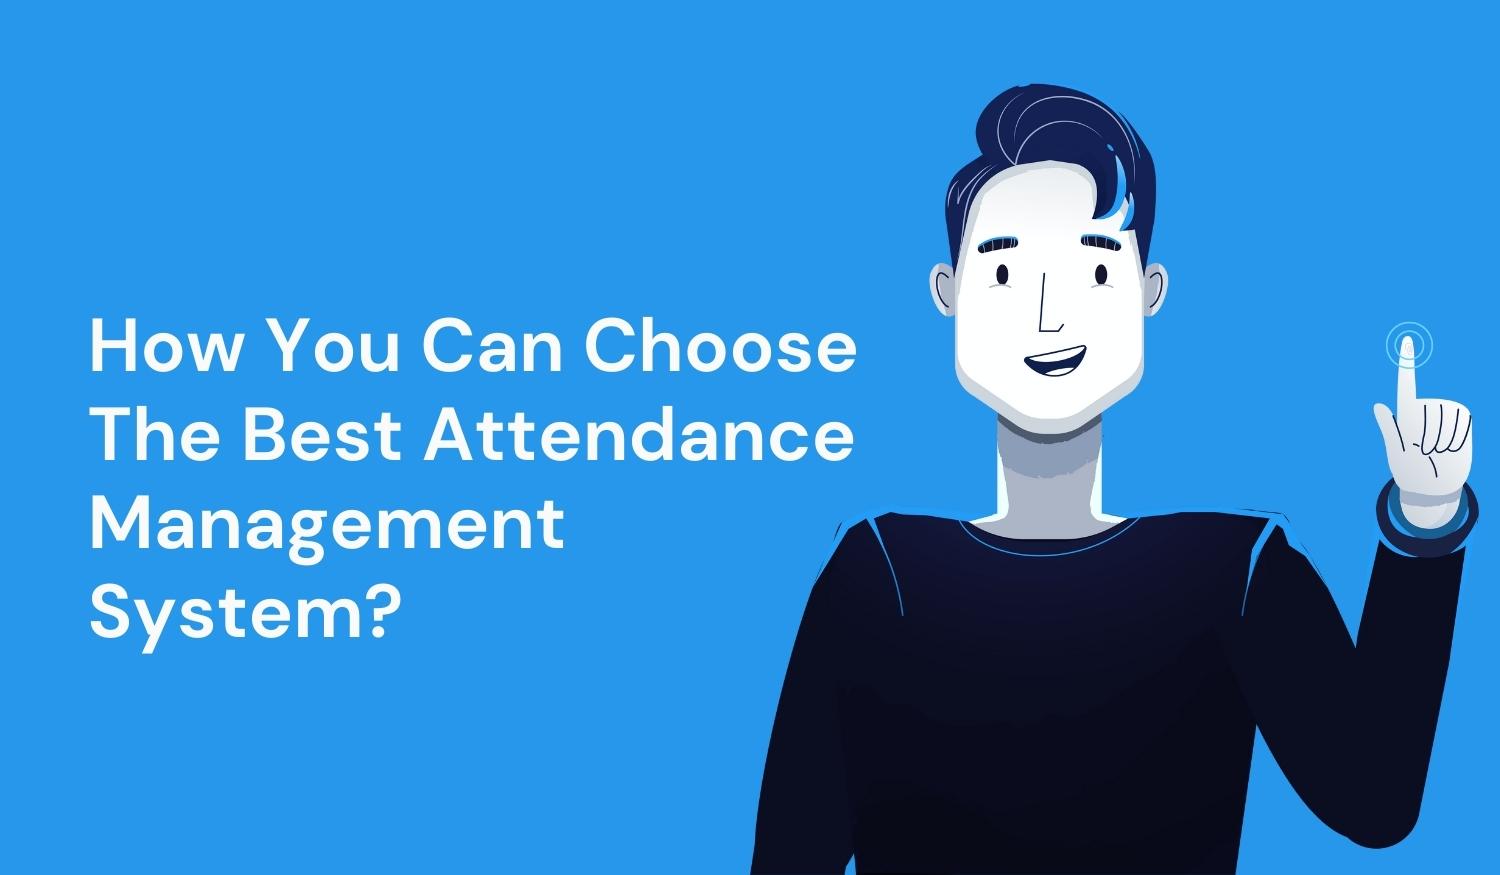 How to Choose The Best Attendance Management System for You?